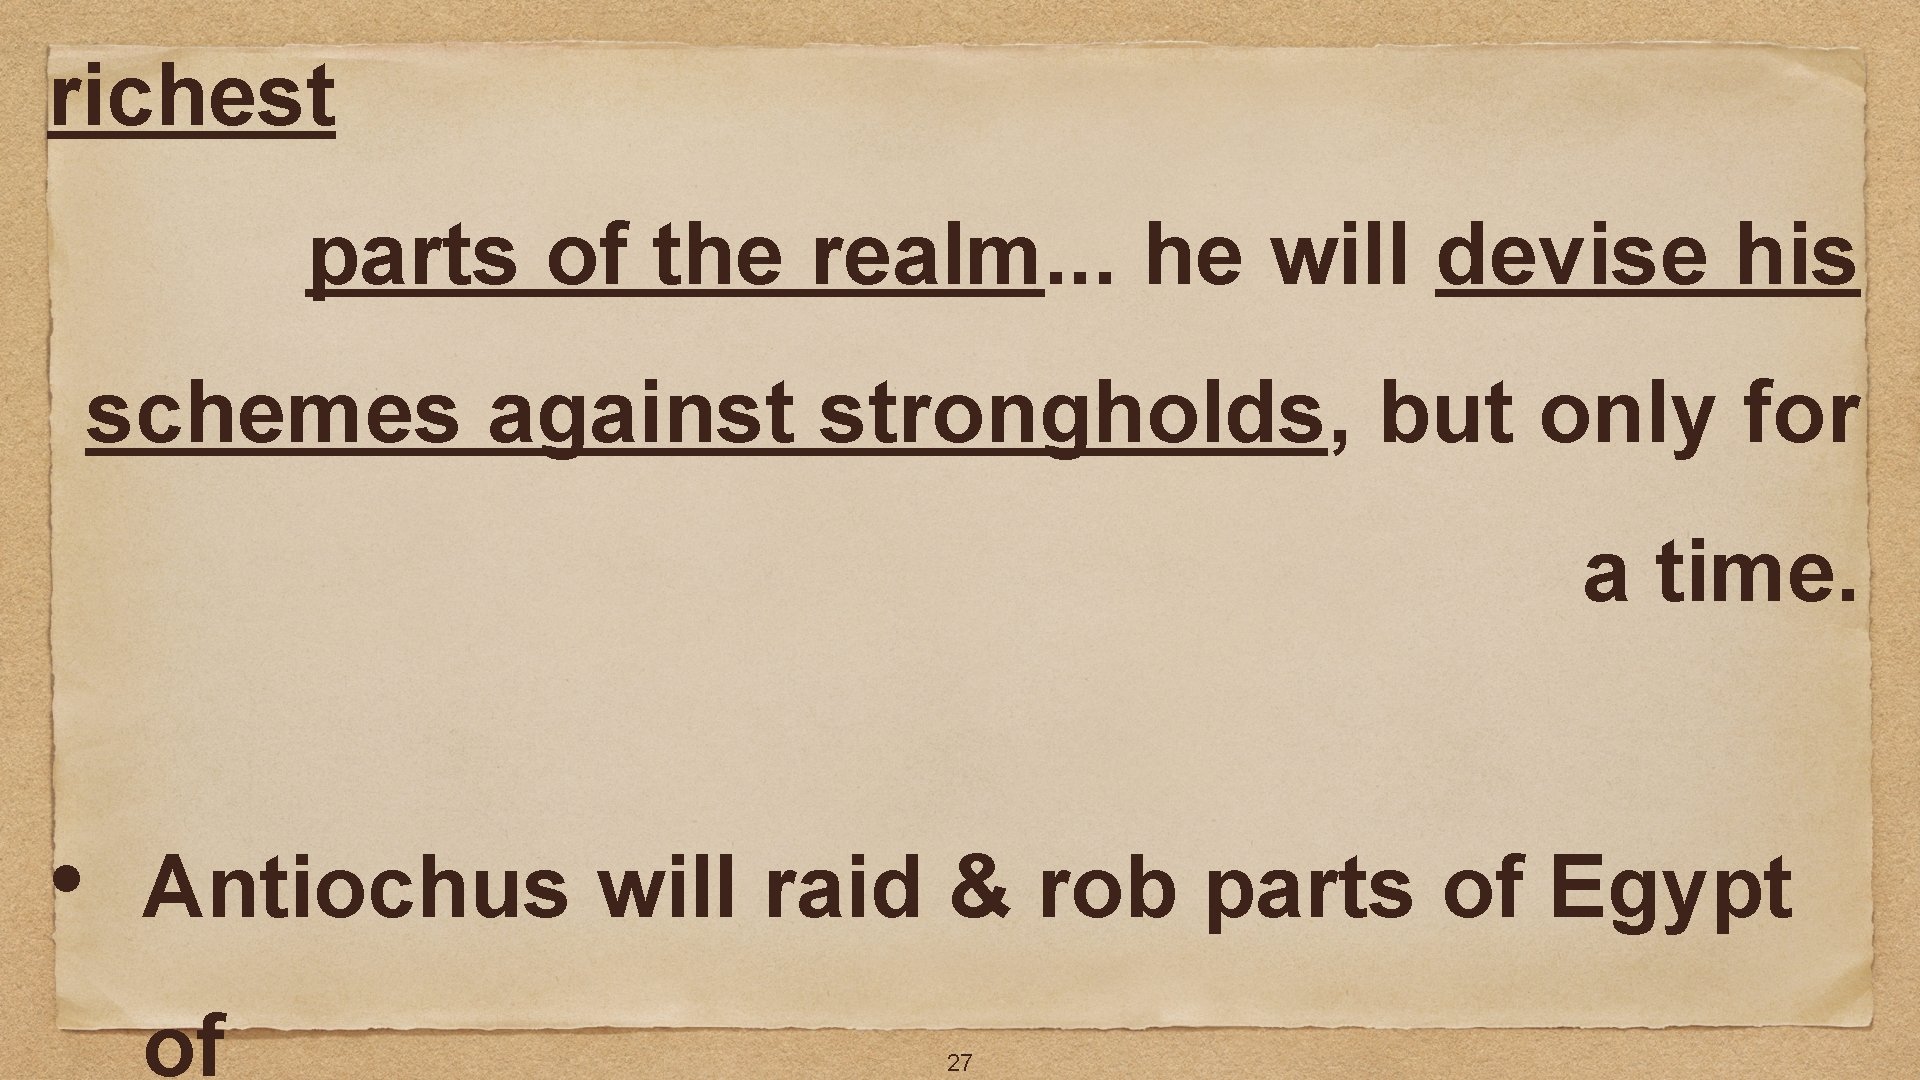 richest parts of the realm. . . he will devise his schemes against strongholds,